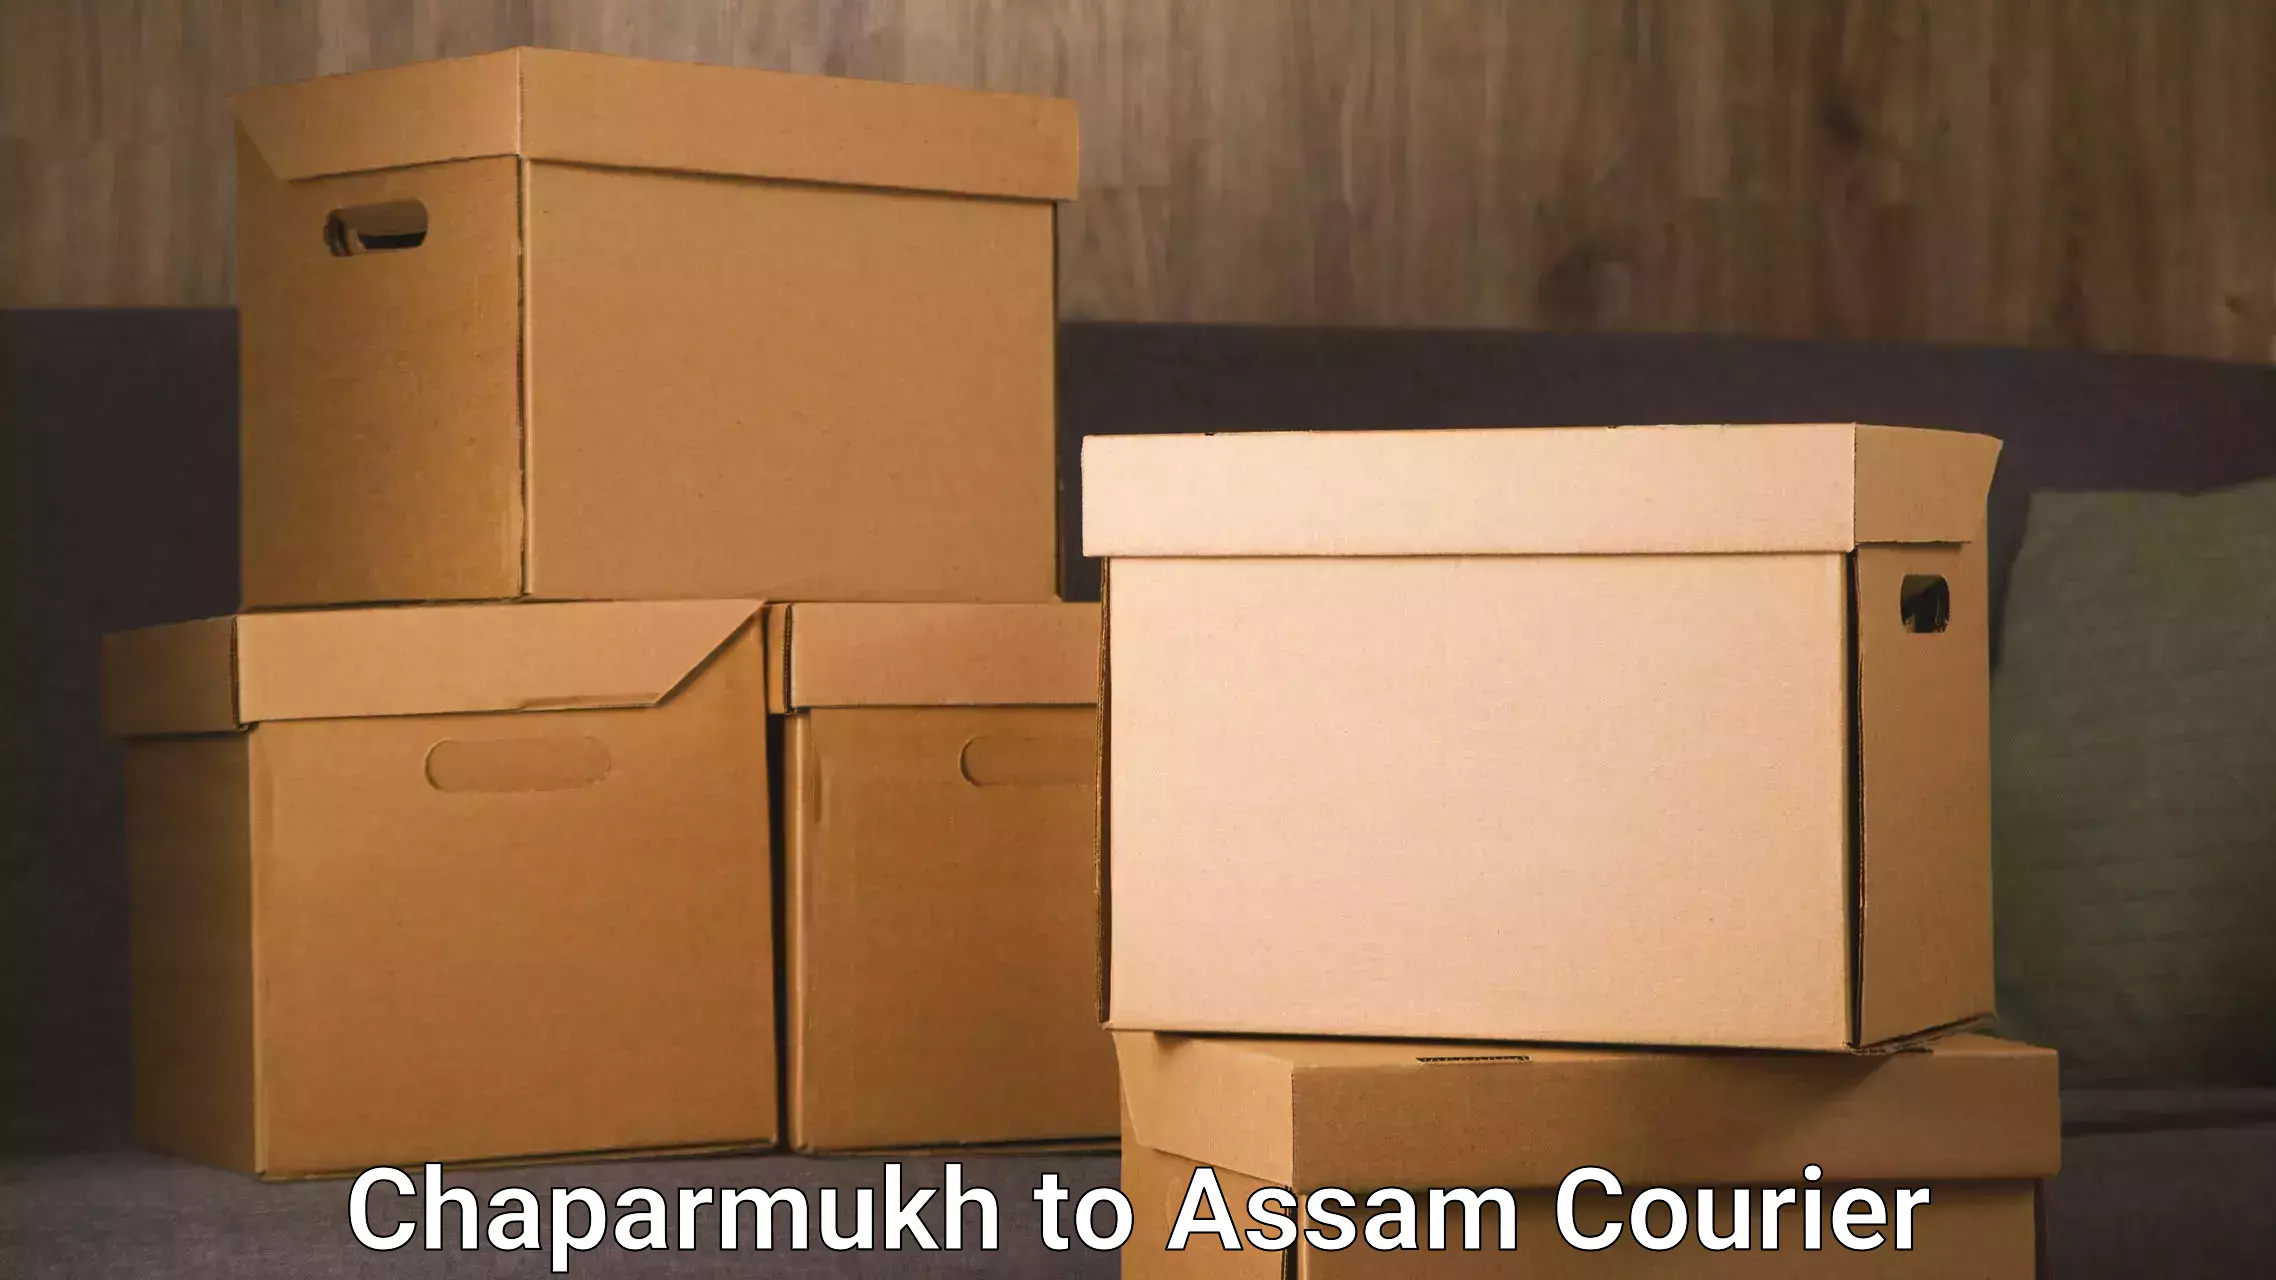 Residential courier service Chaparmukh to Chaparmukh